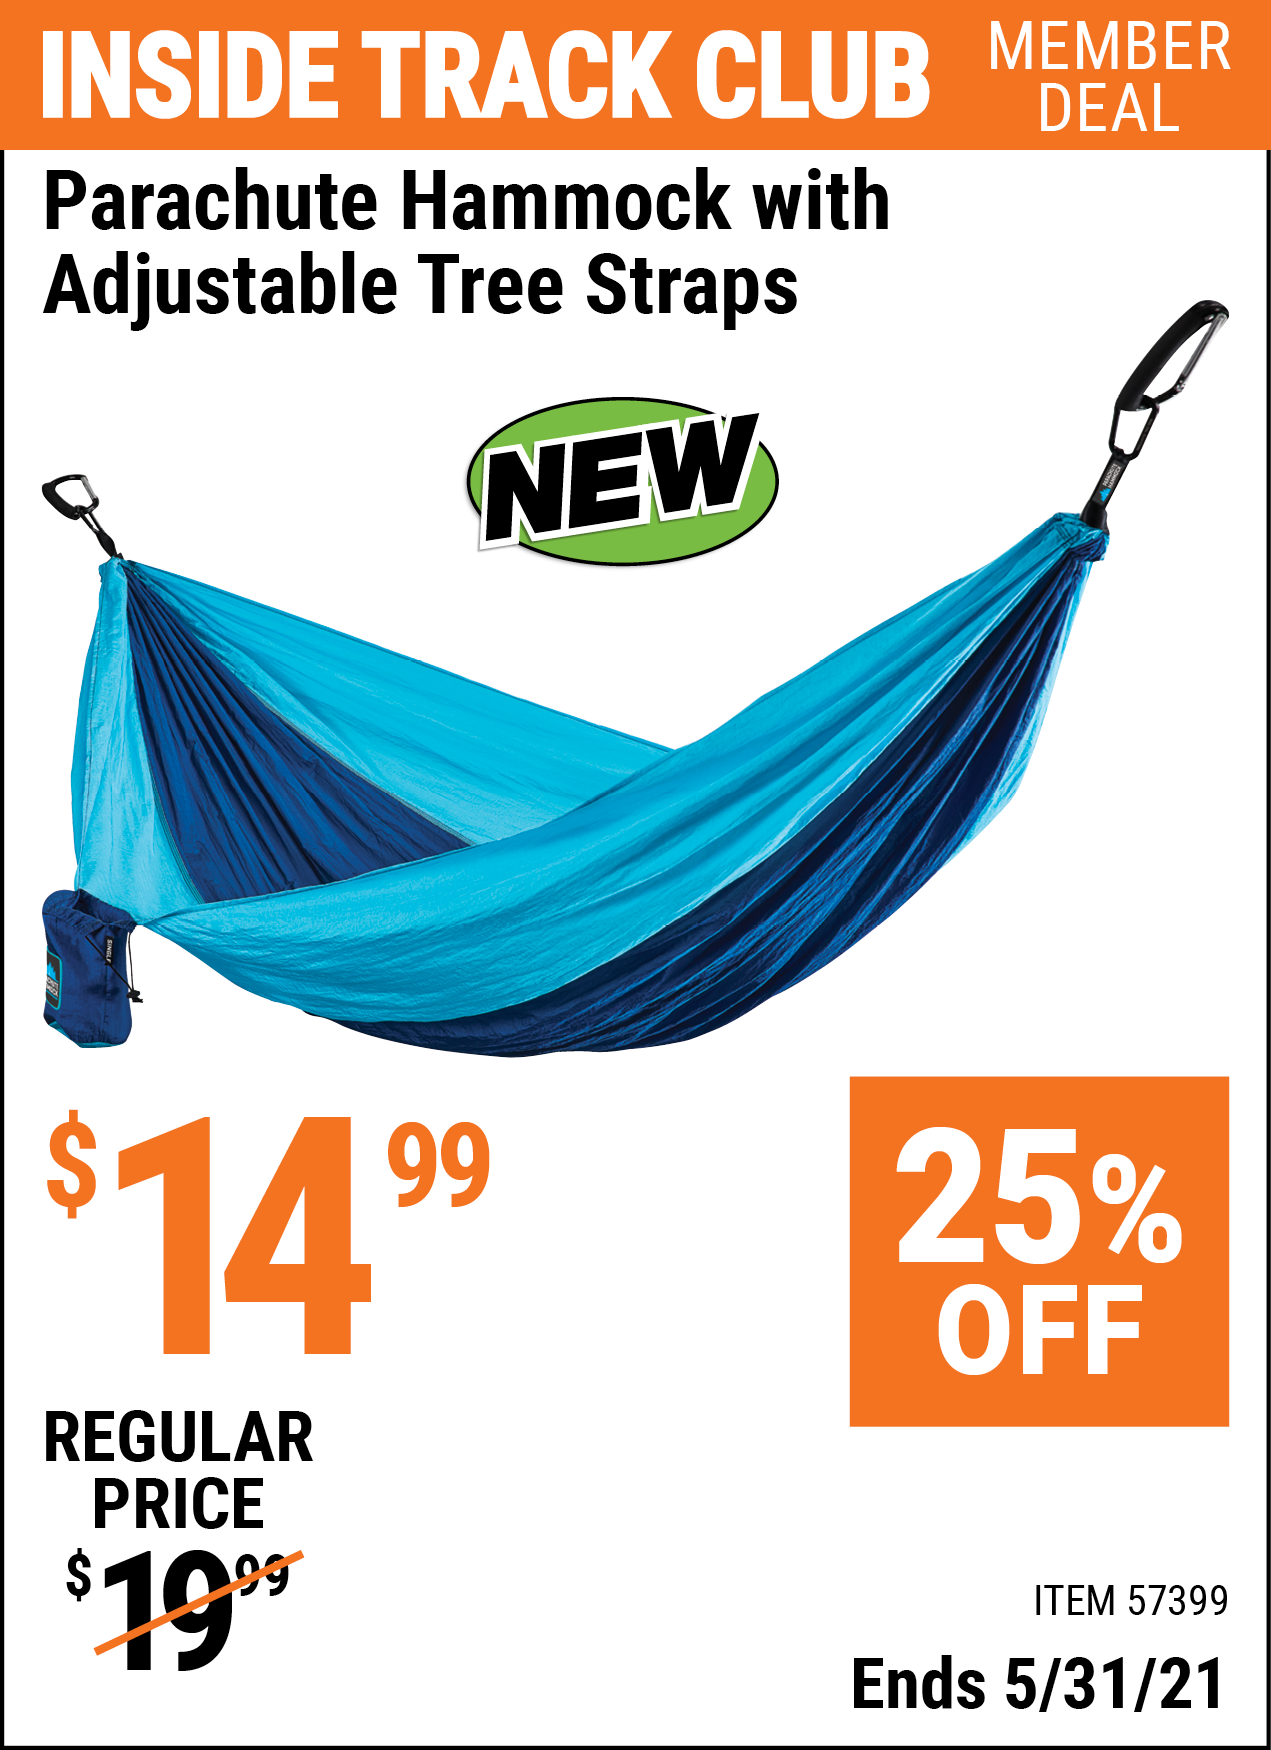 Inside Track Club members can buy the Parachute Hammock With Adjustable Tree Straps (Item 57399) for $14.99, valid through 5/31/2021.